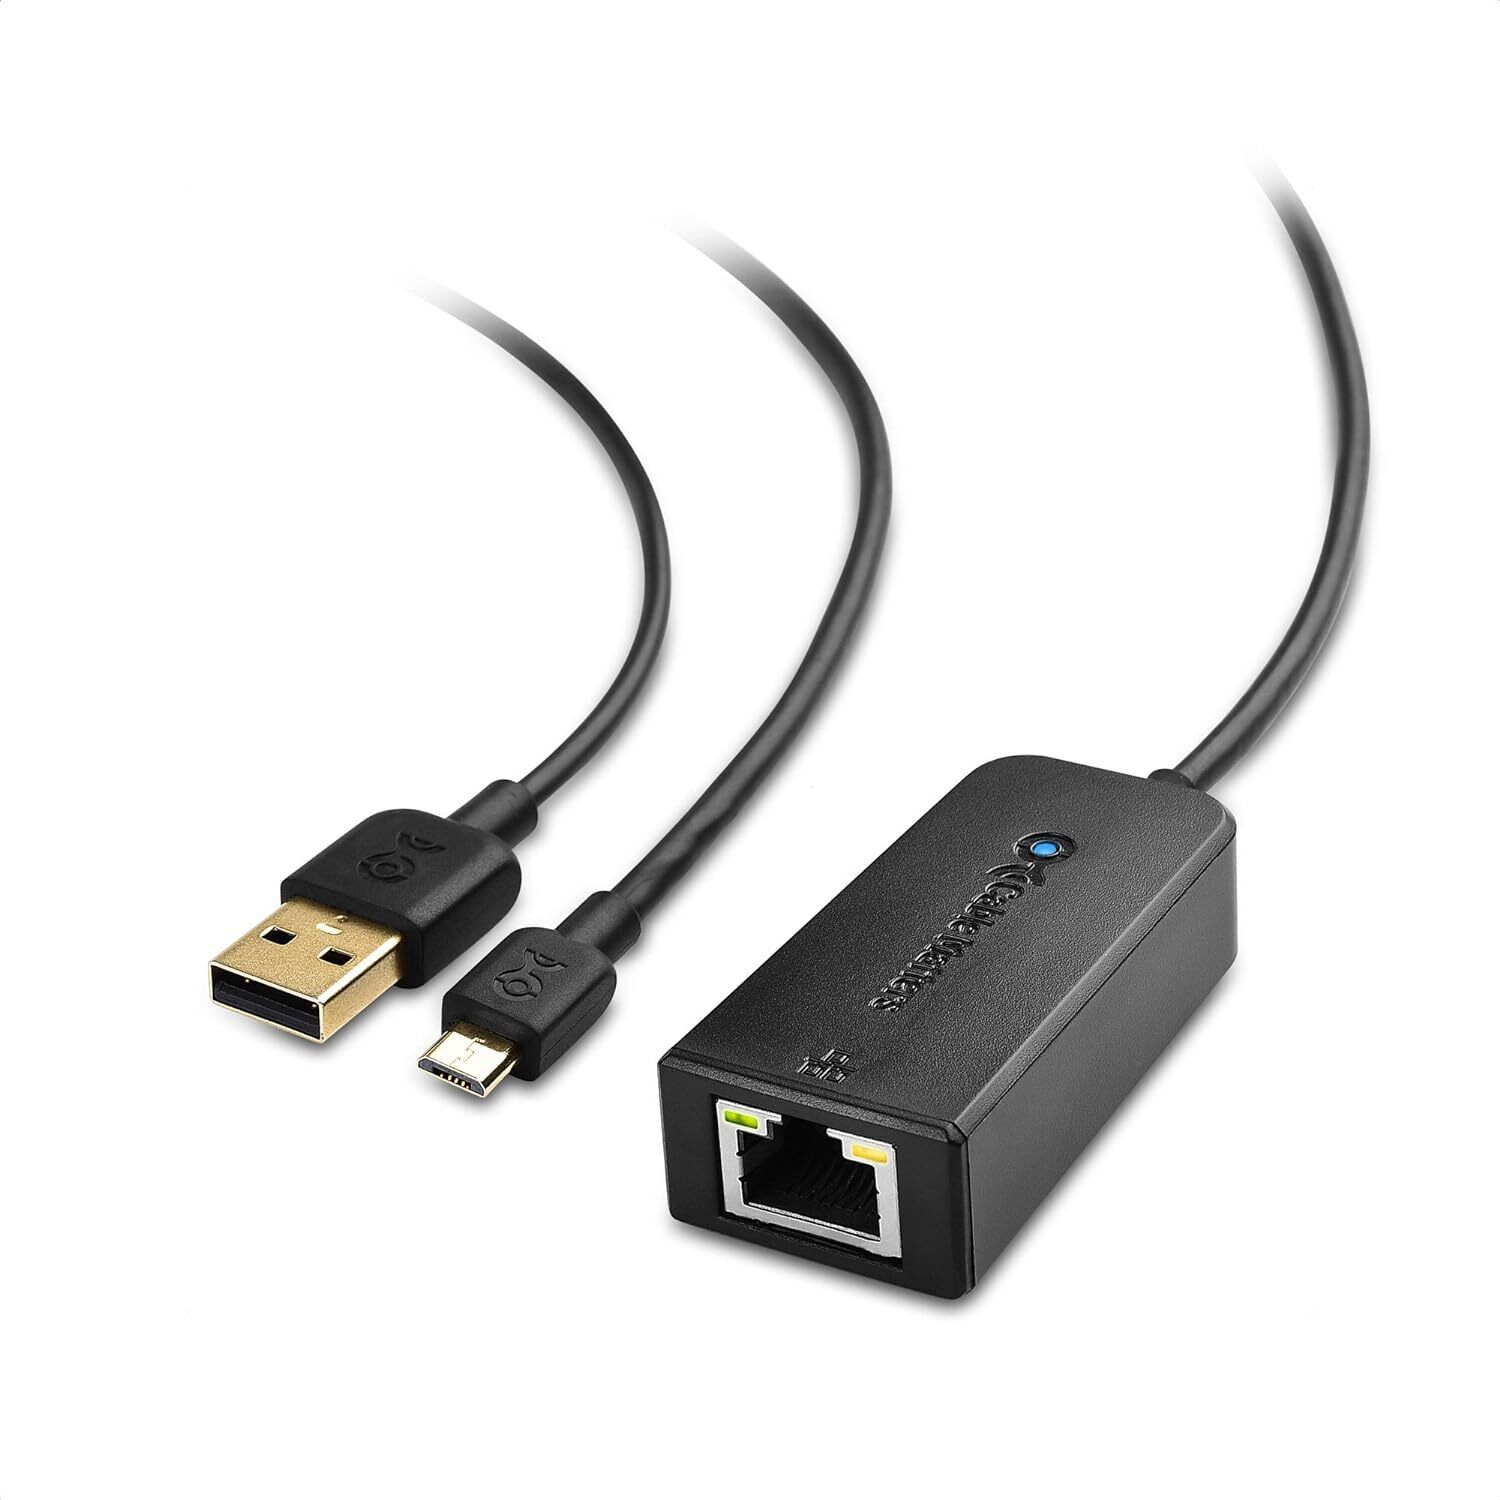 Cable Matters Micro USB to Ethernet Adapter Up to 480Mbps for Streaming Sticks